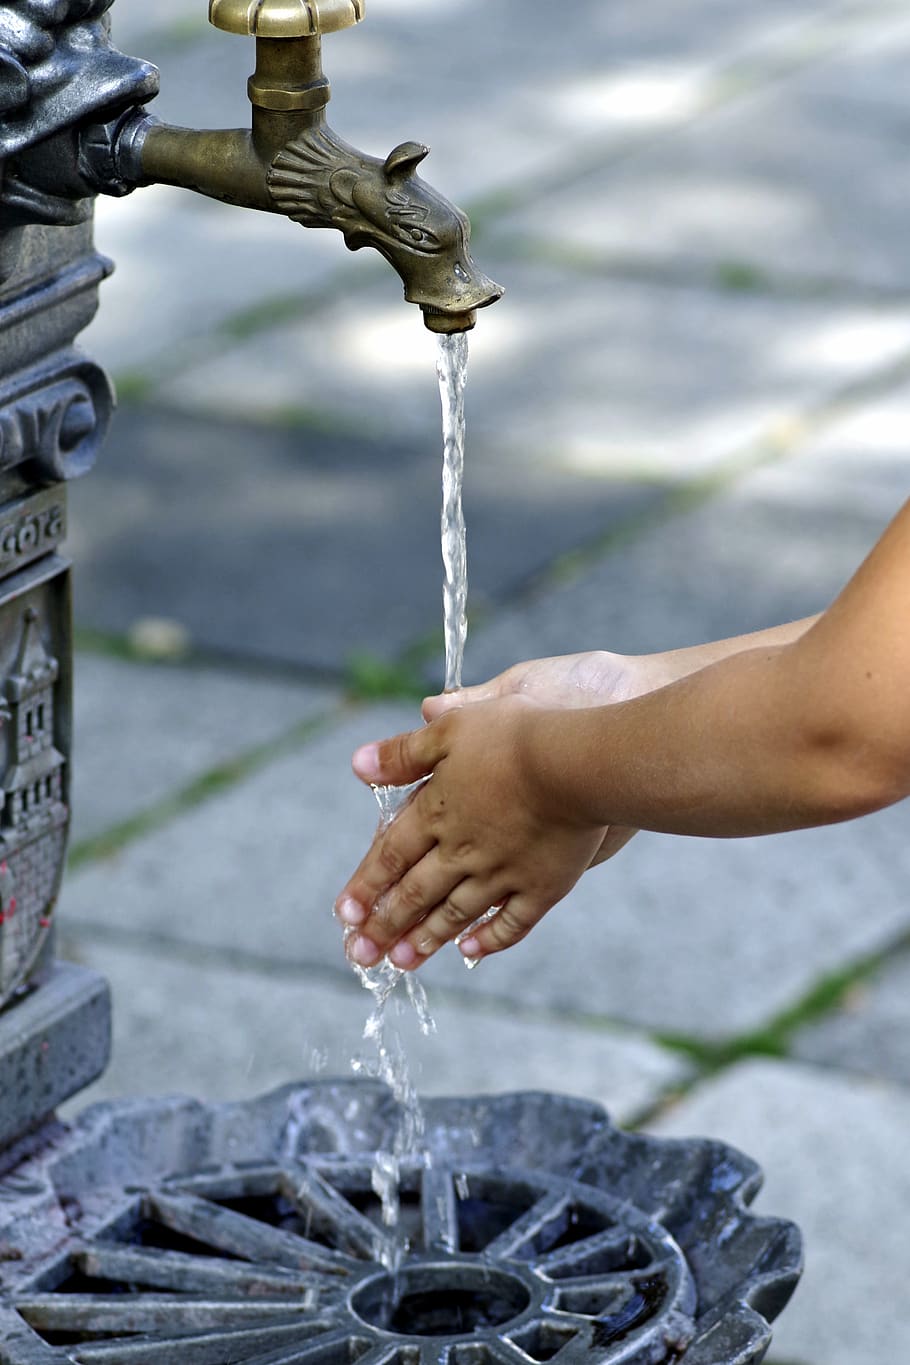 wash hands, the purity of the, water, faucet, freshen up, flowing, hygiene, city, street, hands